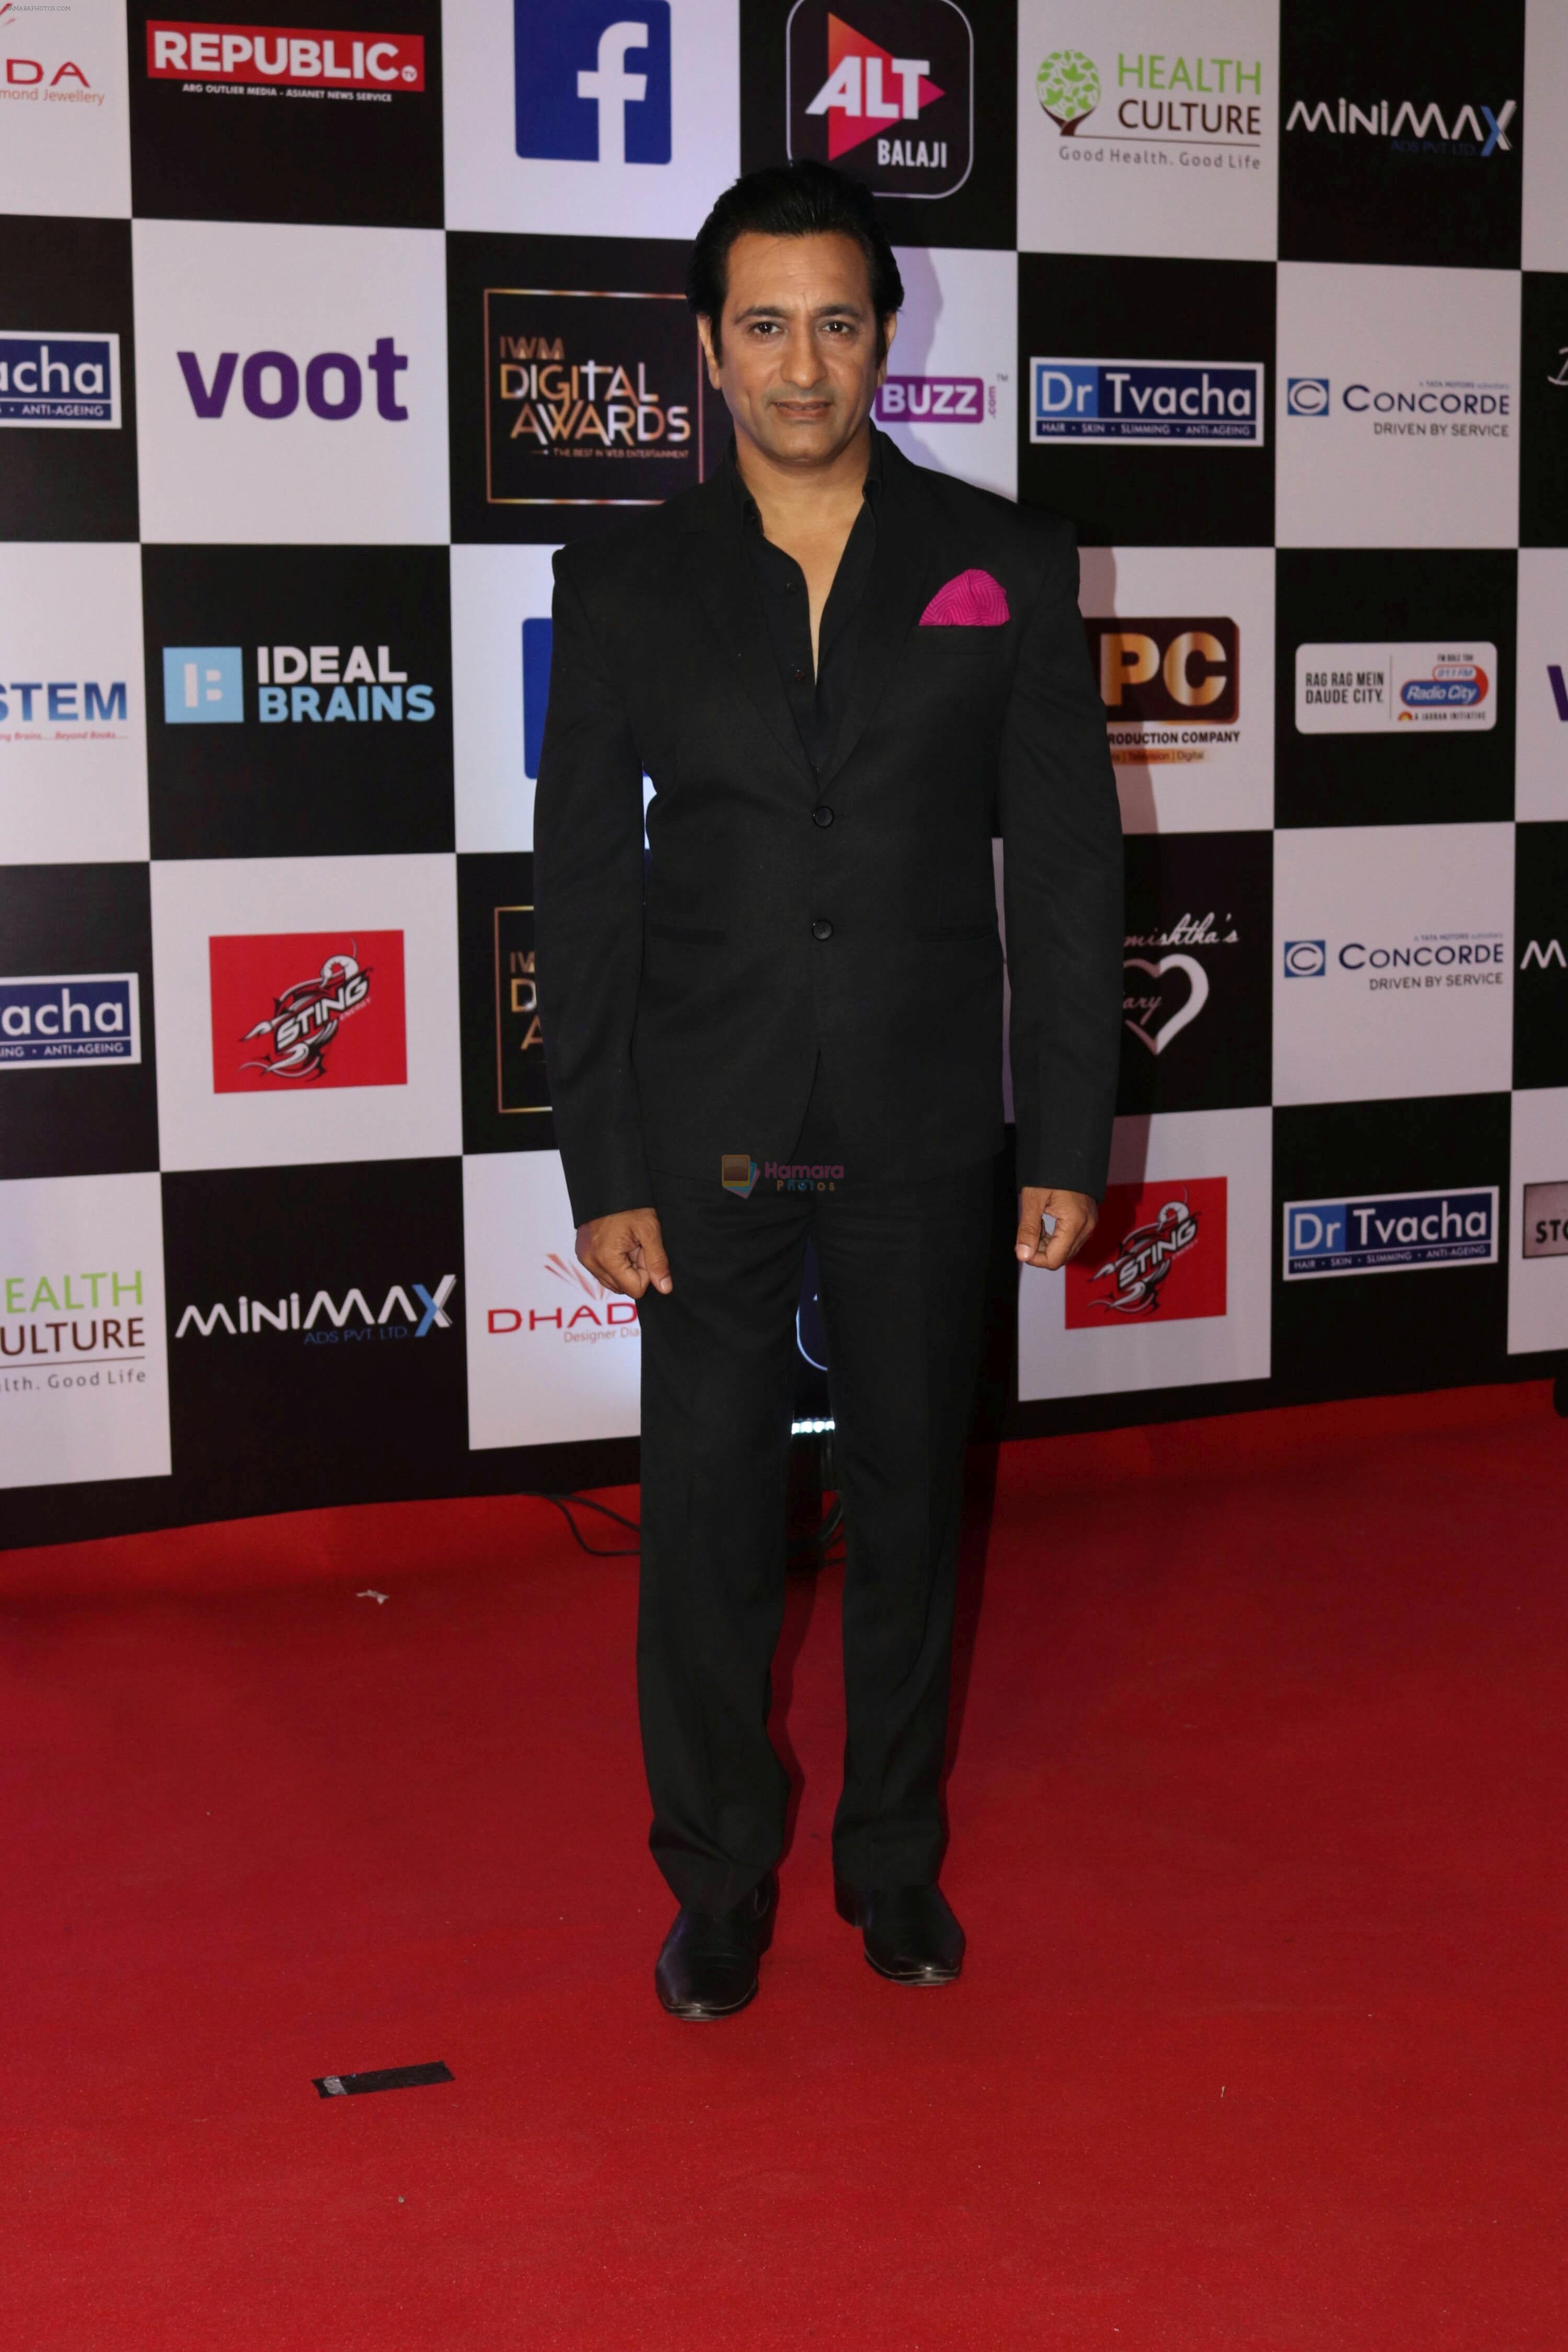 Rajiv Paul Attend Digital Awards Function on 10th March 2018